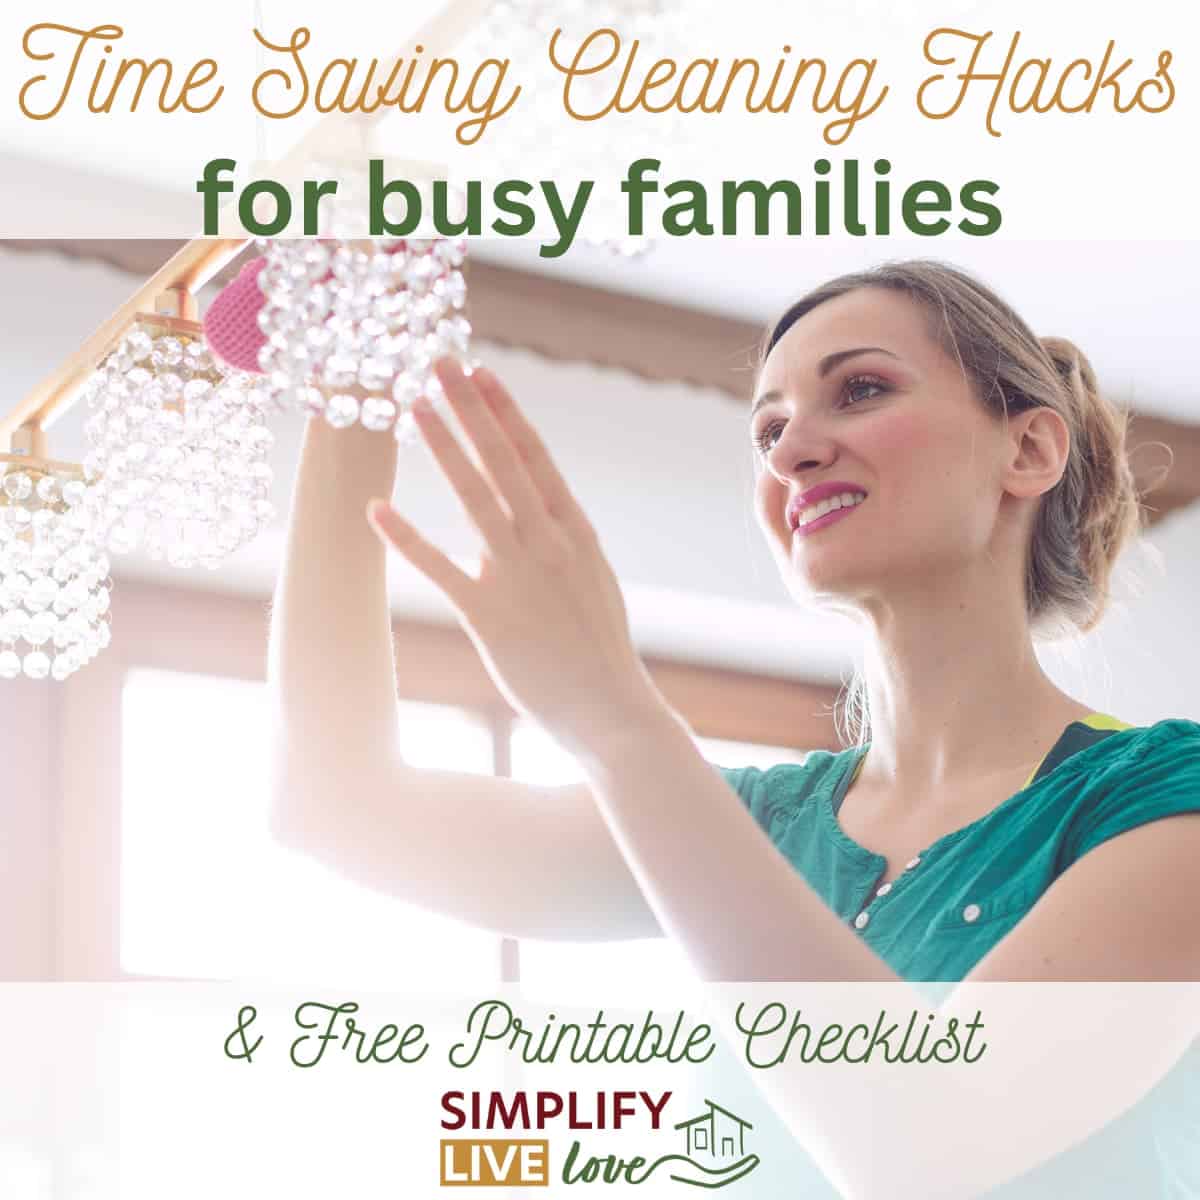 https://simplifylivelove.com/wp-content/uploads/2020/03/Time-Saving-Cleaning-Hacks-and-Free-Printable-Checklist-.jpg